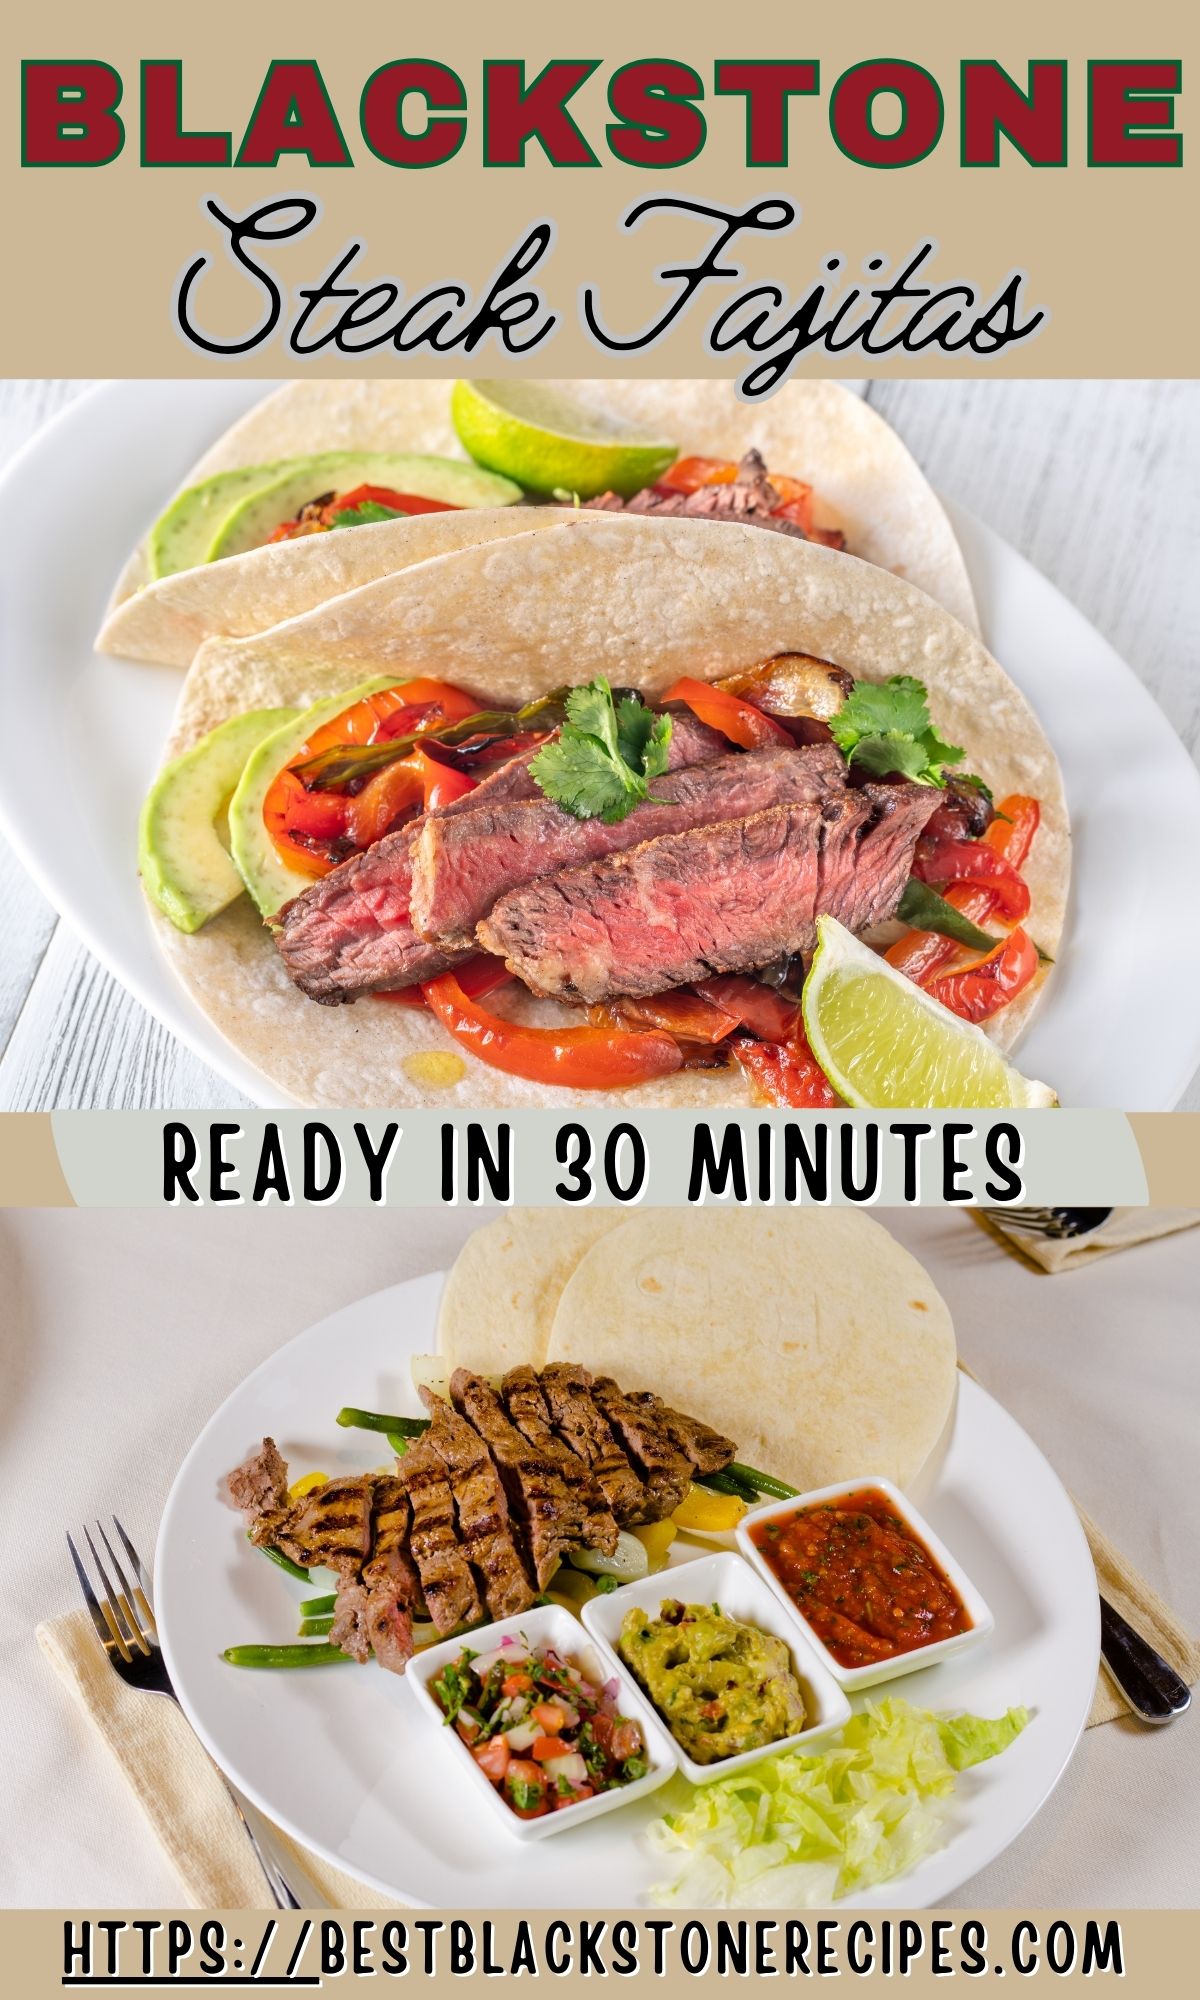 Promotional image for blackstone steak fajitas, showing tortillas filled with steak and veggies, garnished with lime and avocado. text states "ready in 30 minutes" with a website link below.